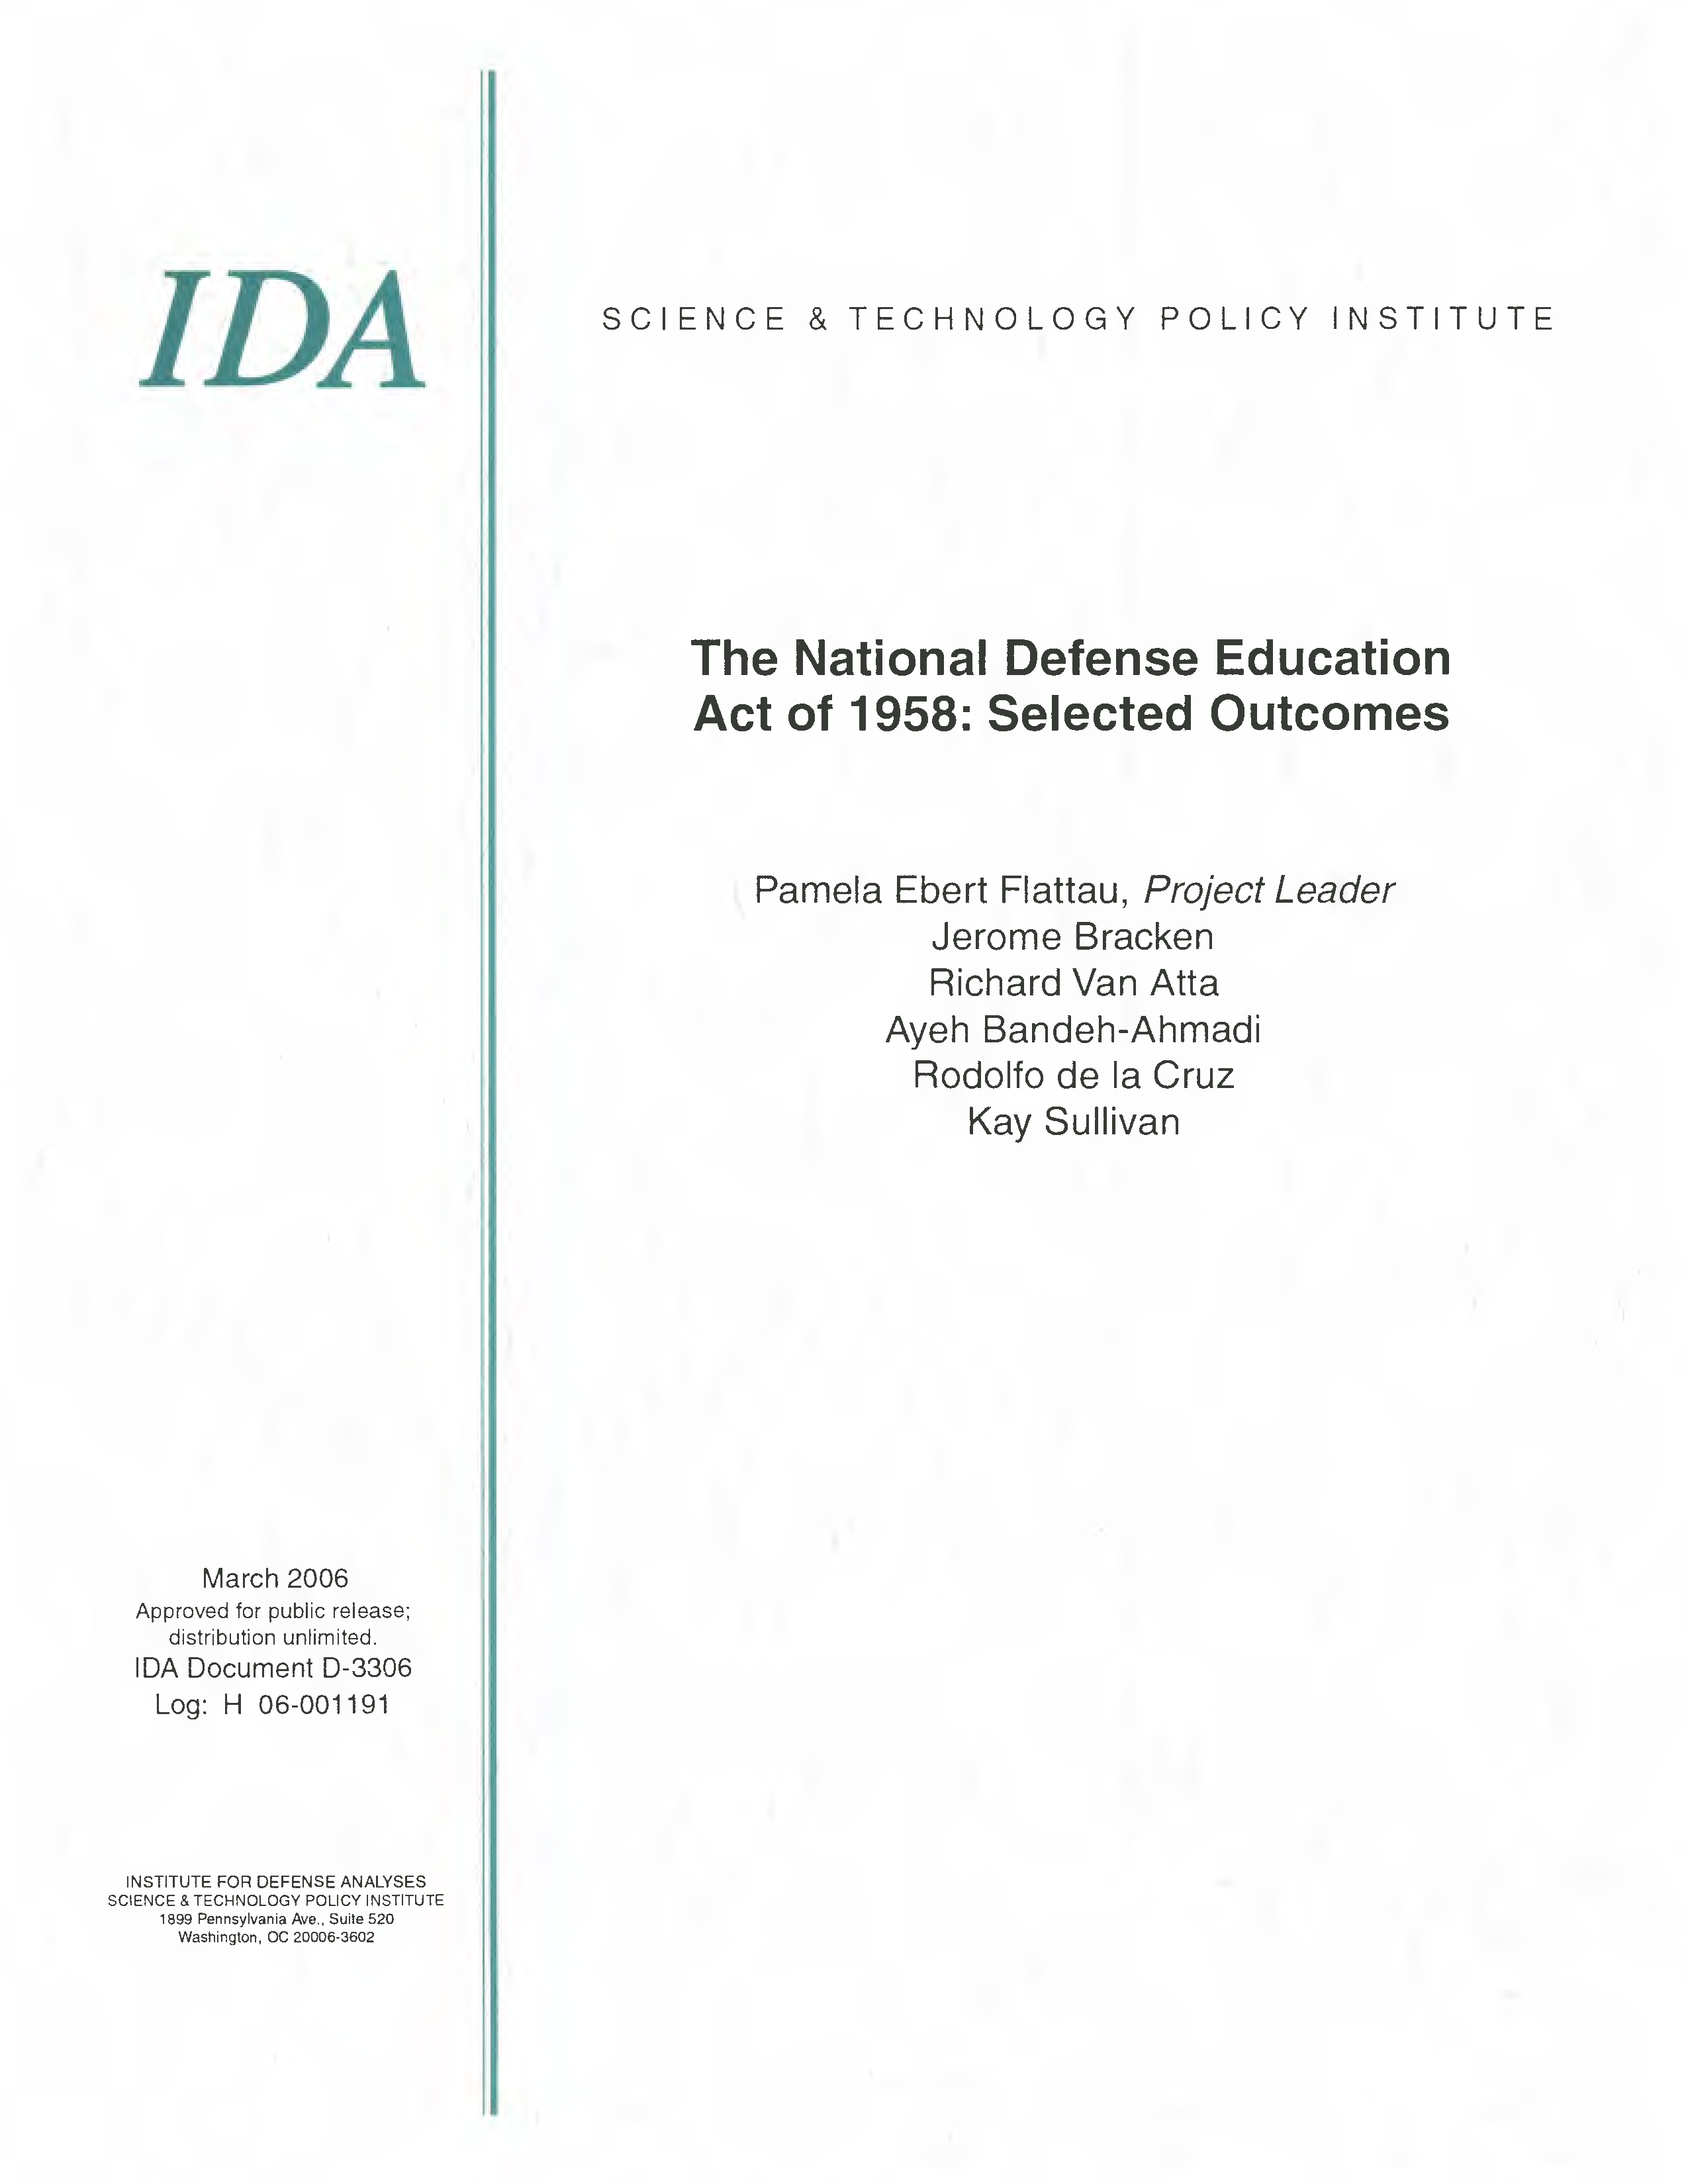 The National Defense Education Act of 1958: Selected Outcomes